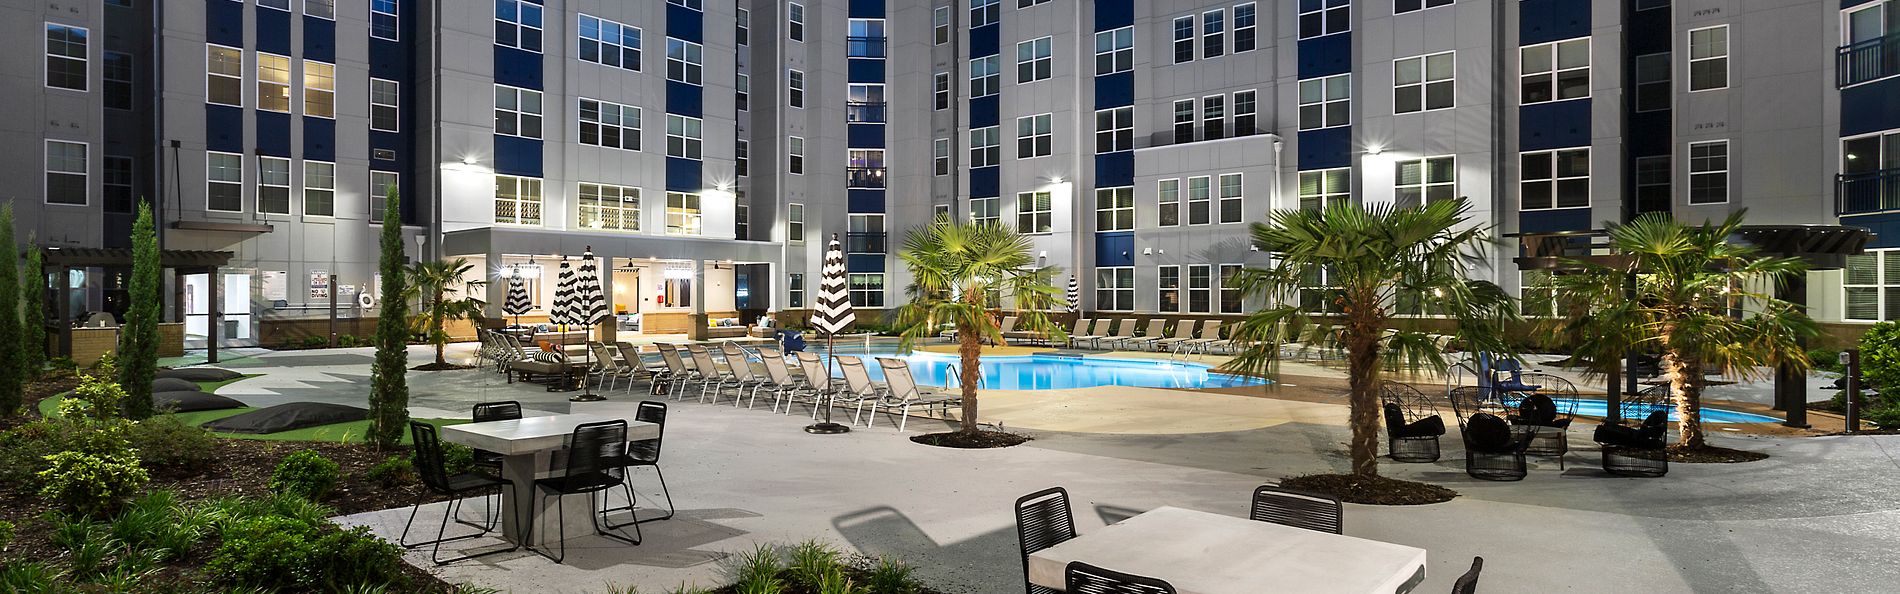 Pool side area of Gather Uptown Apartments 